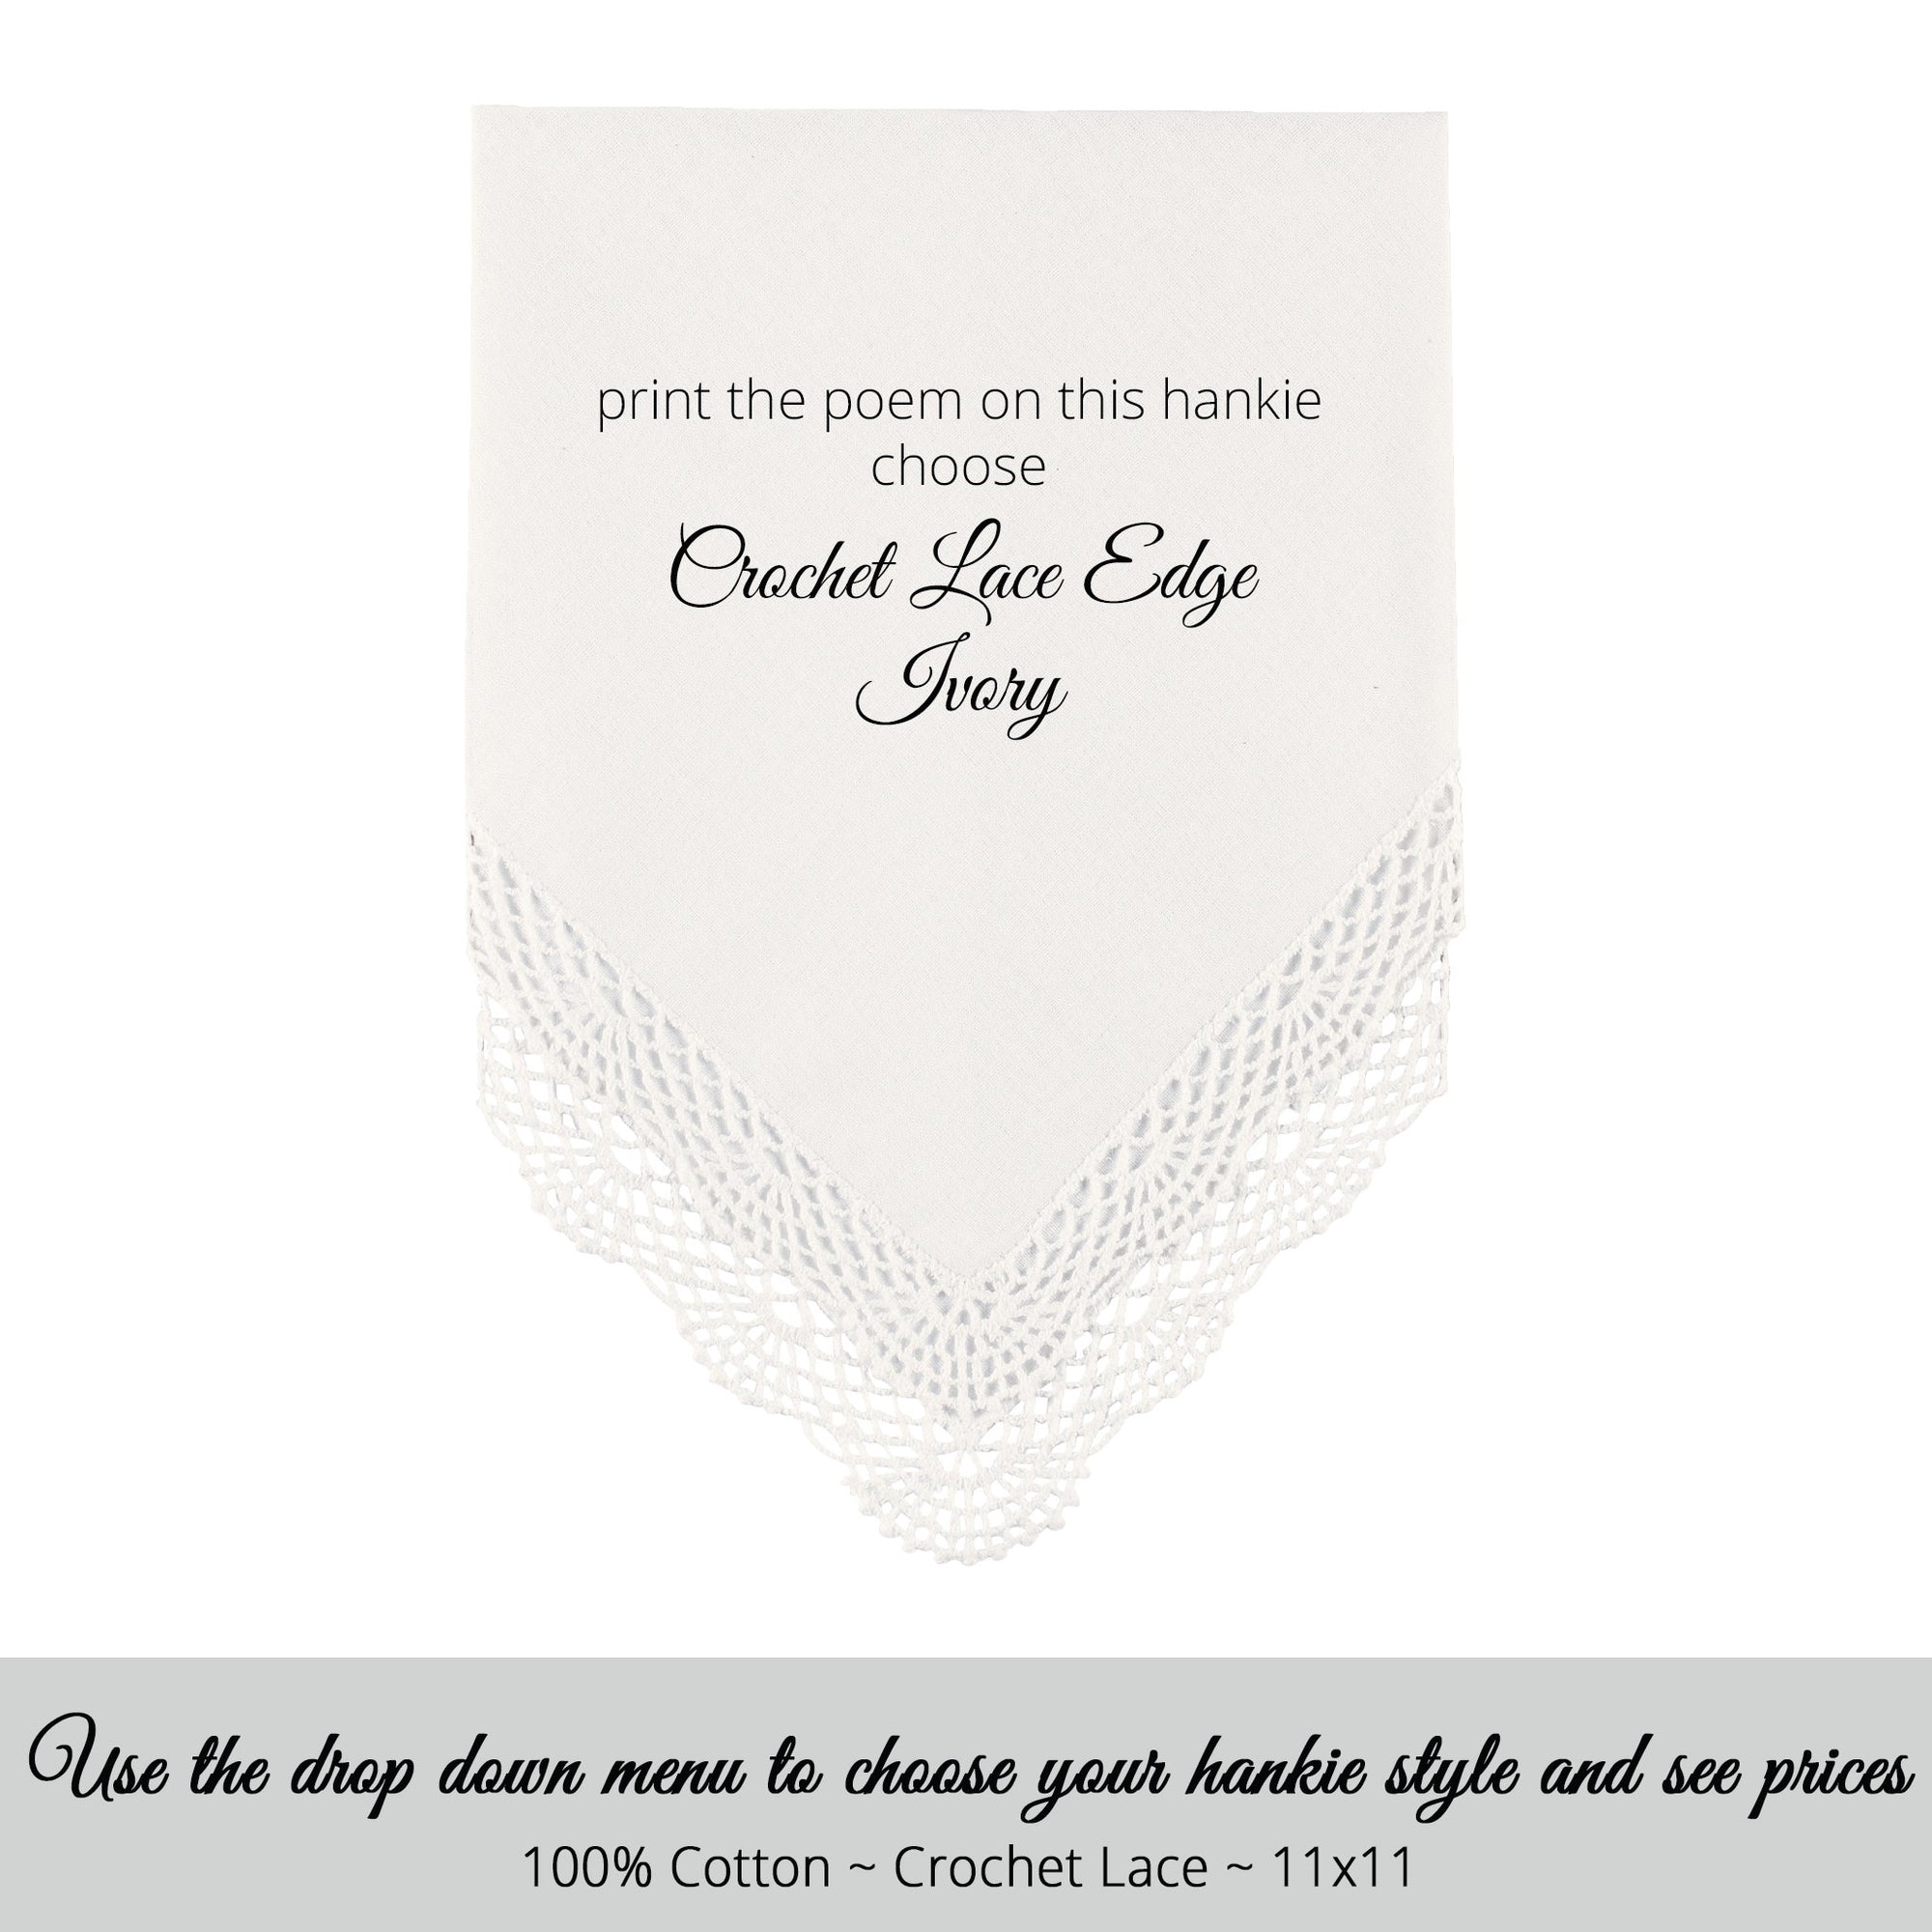 Wedding handkerchief ivory with crochet lace edge for the mother of the bride poem